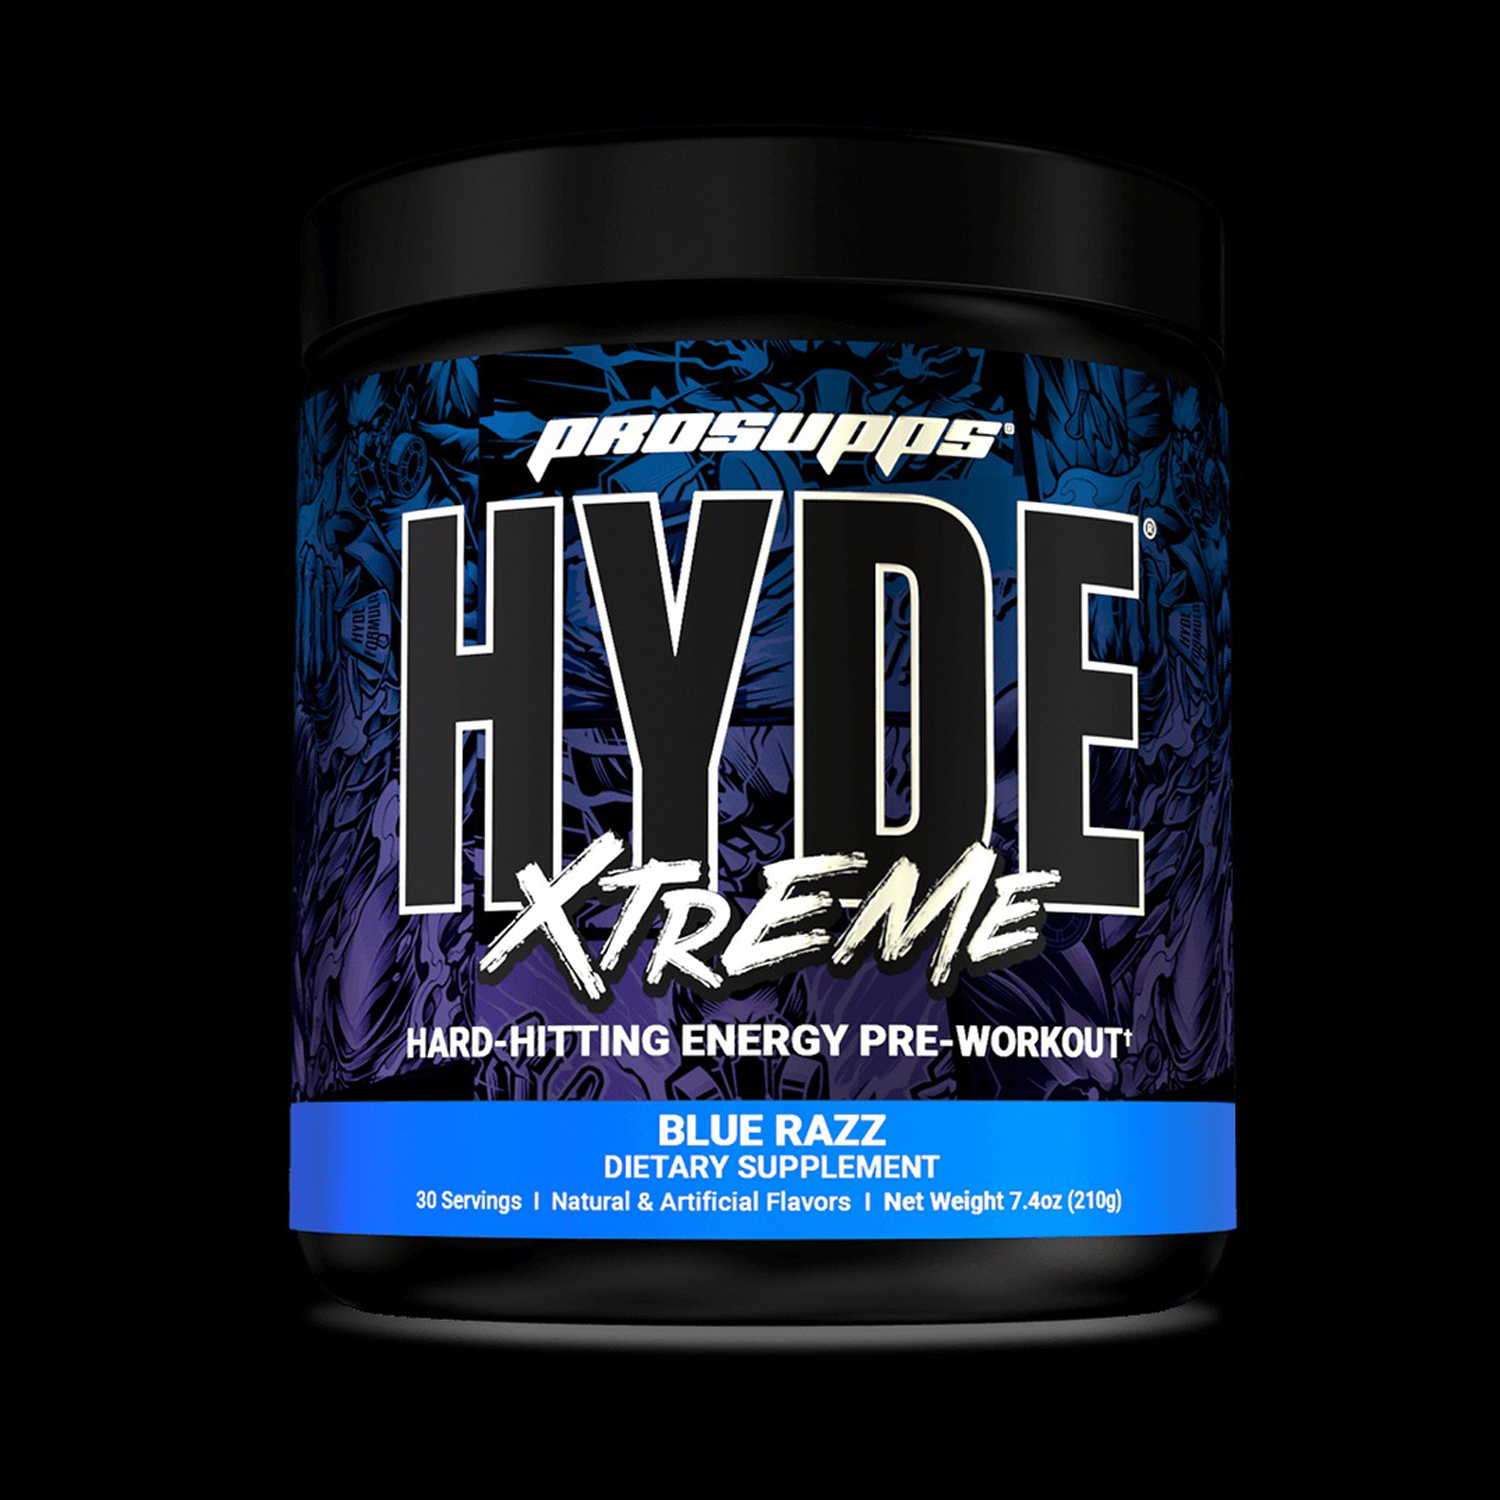 ProSupps HYDE XTREME